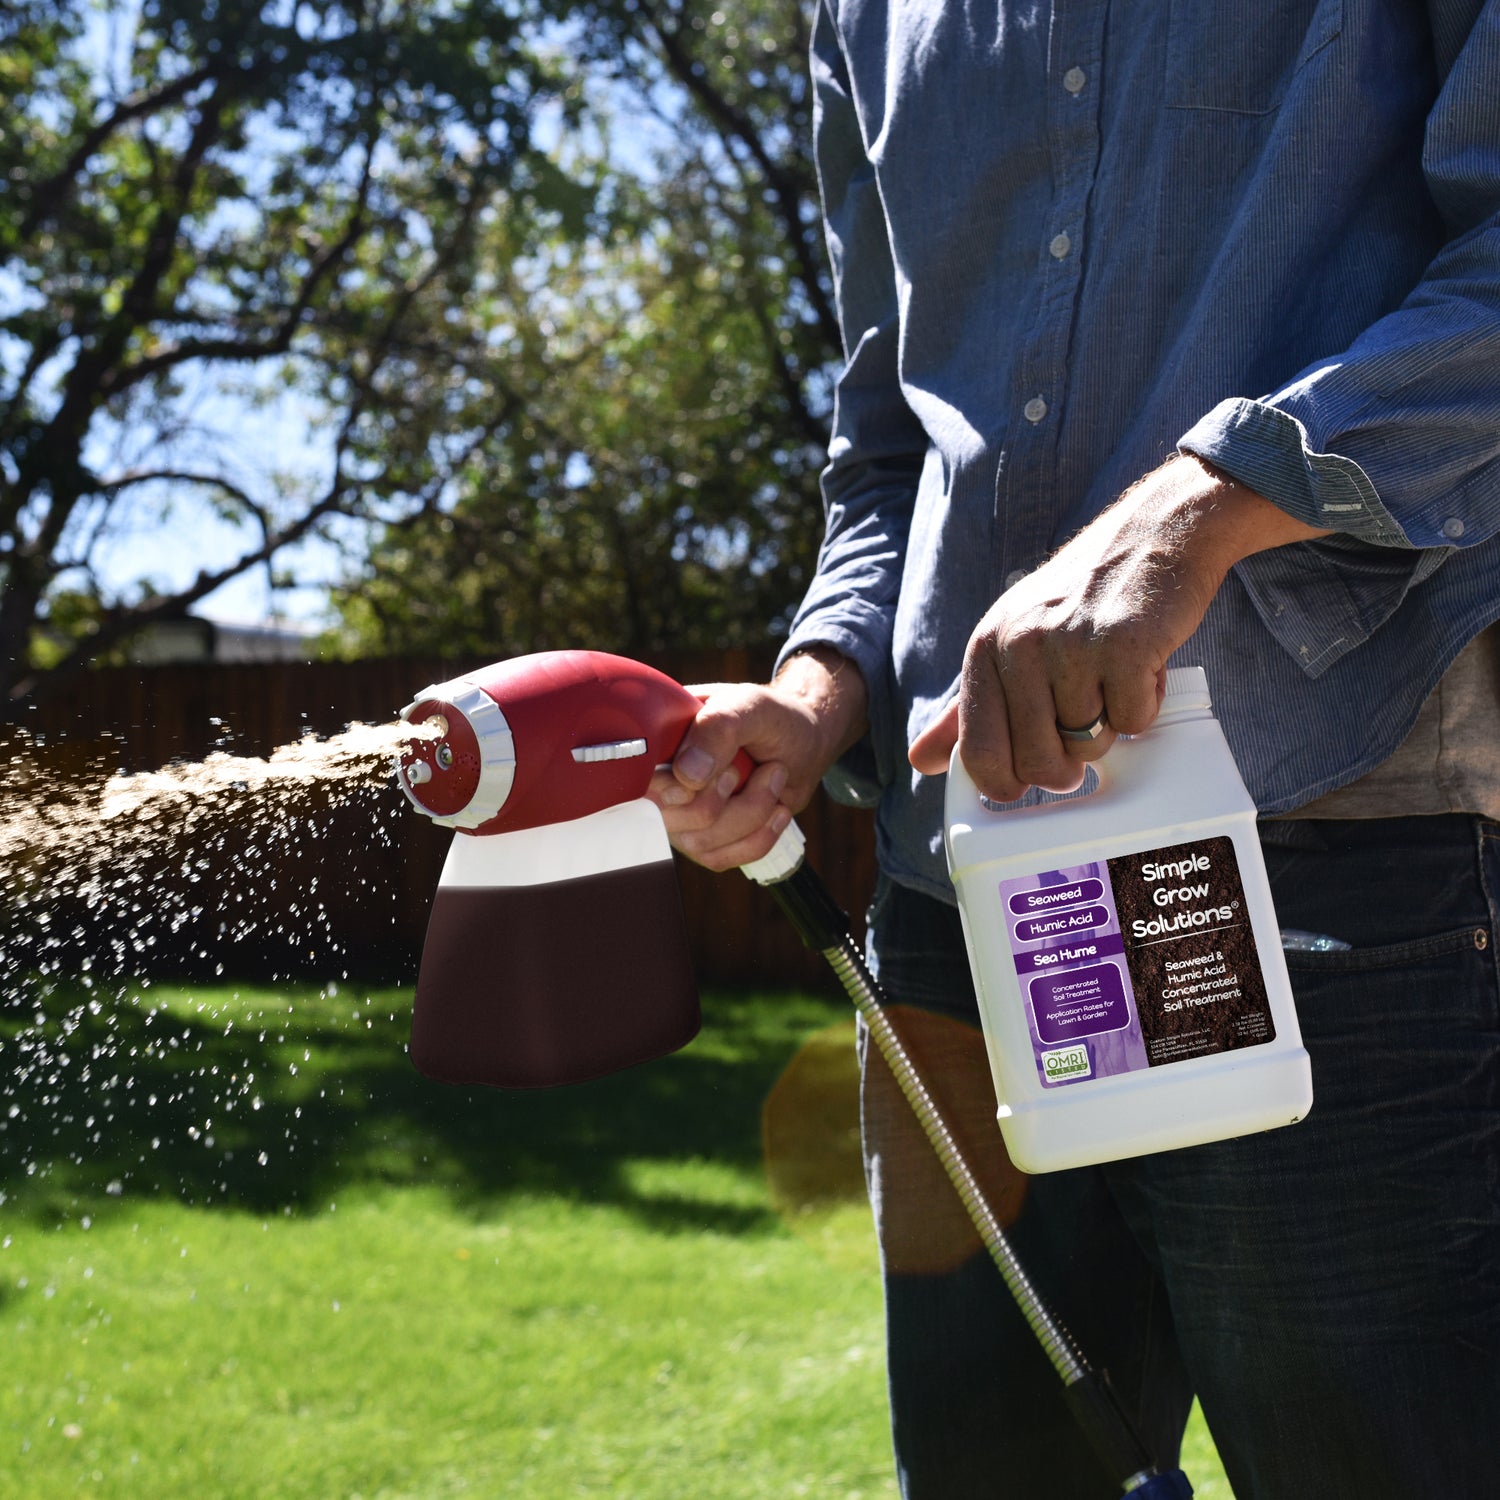 Ortho dial sprayer to apply simple grow solutions Humic acid